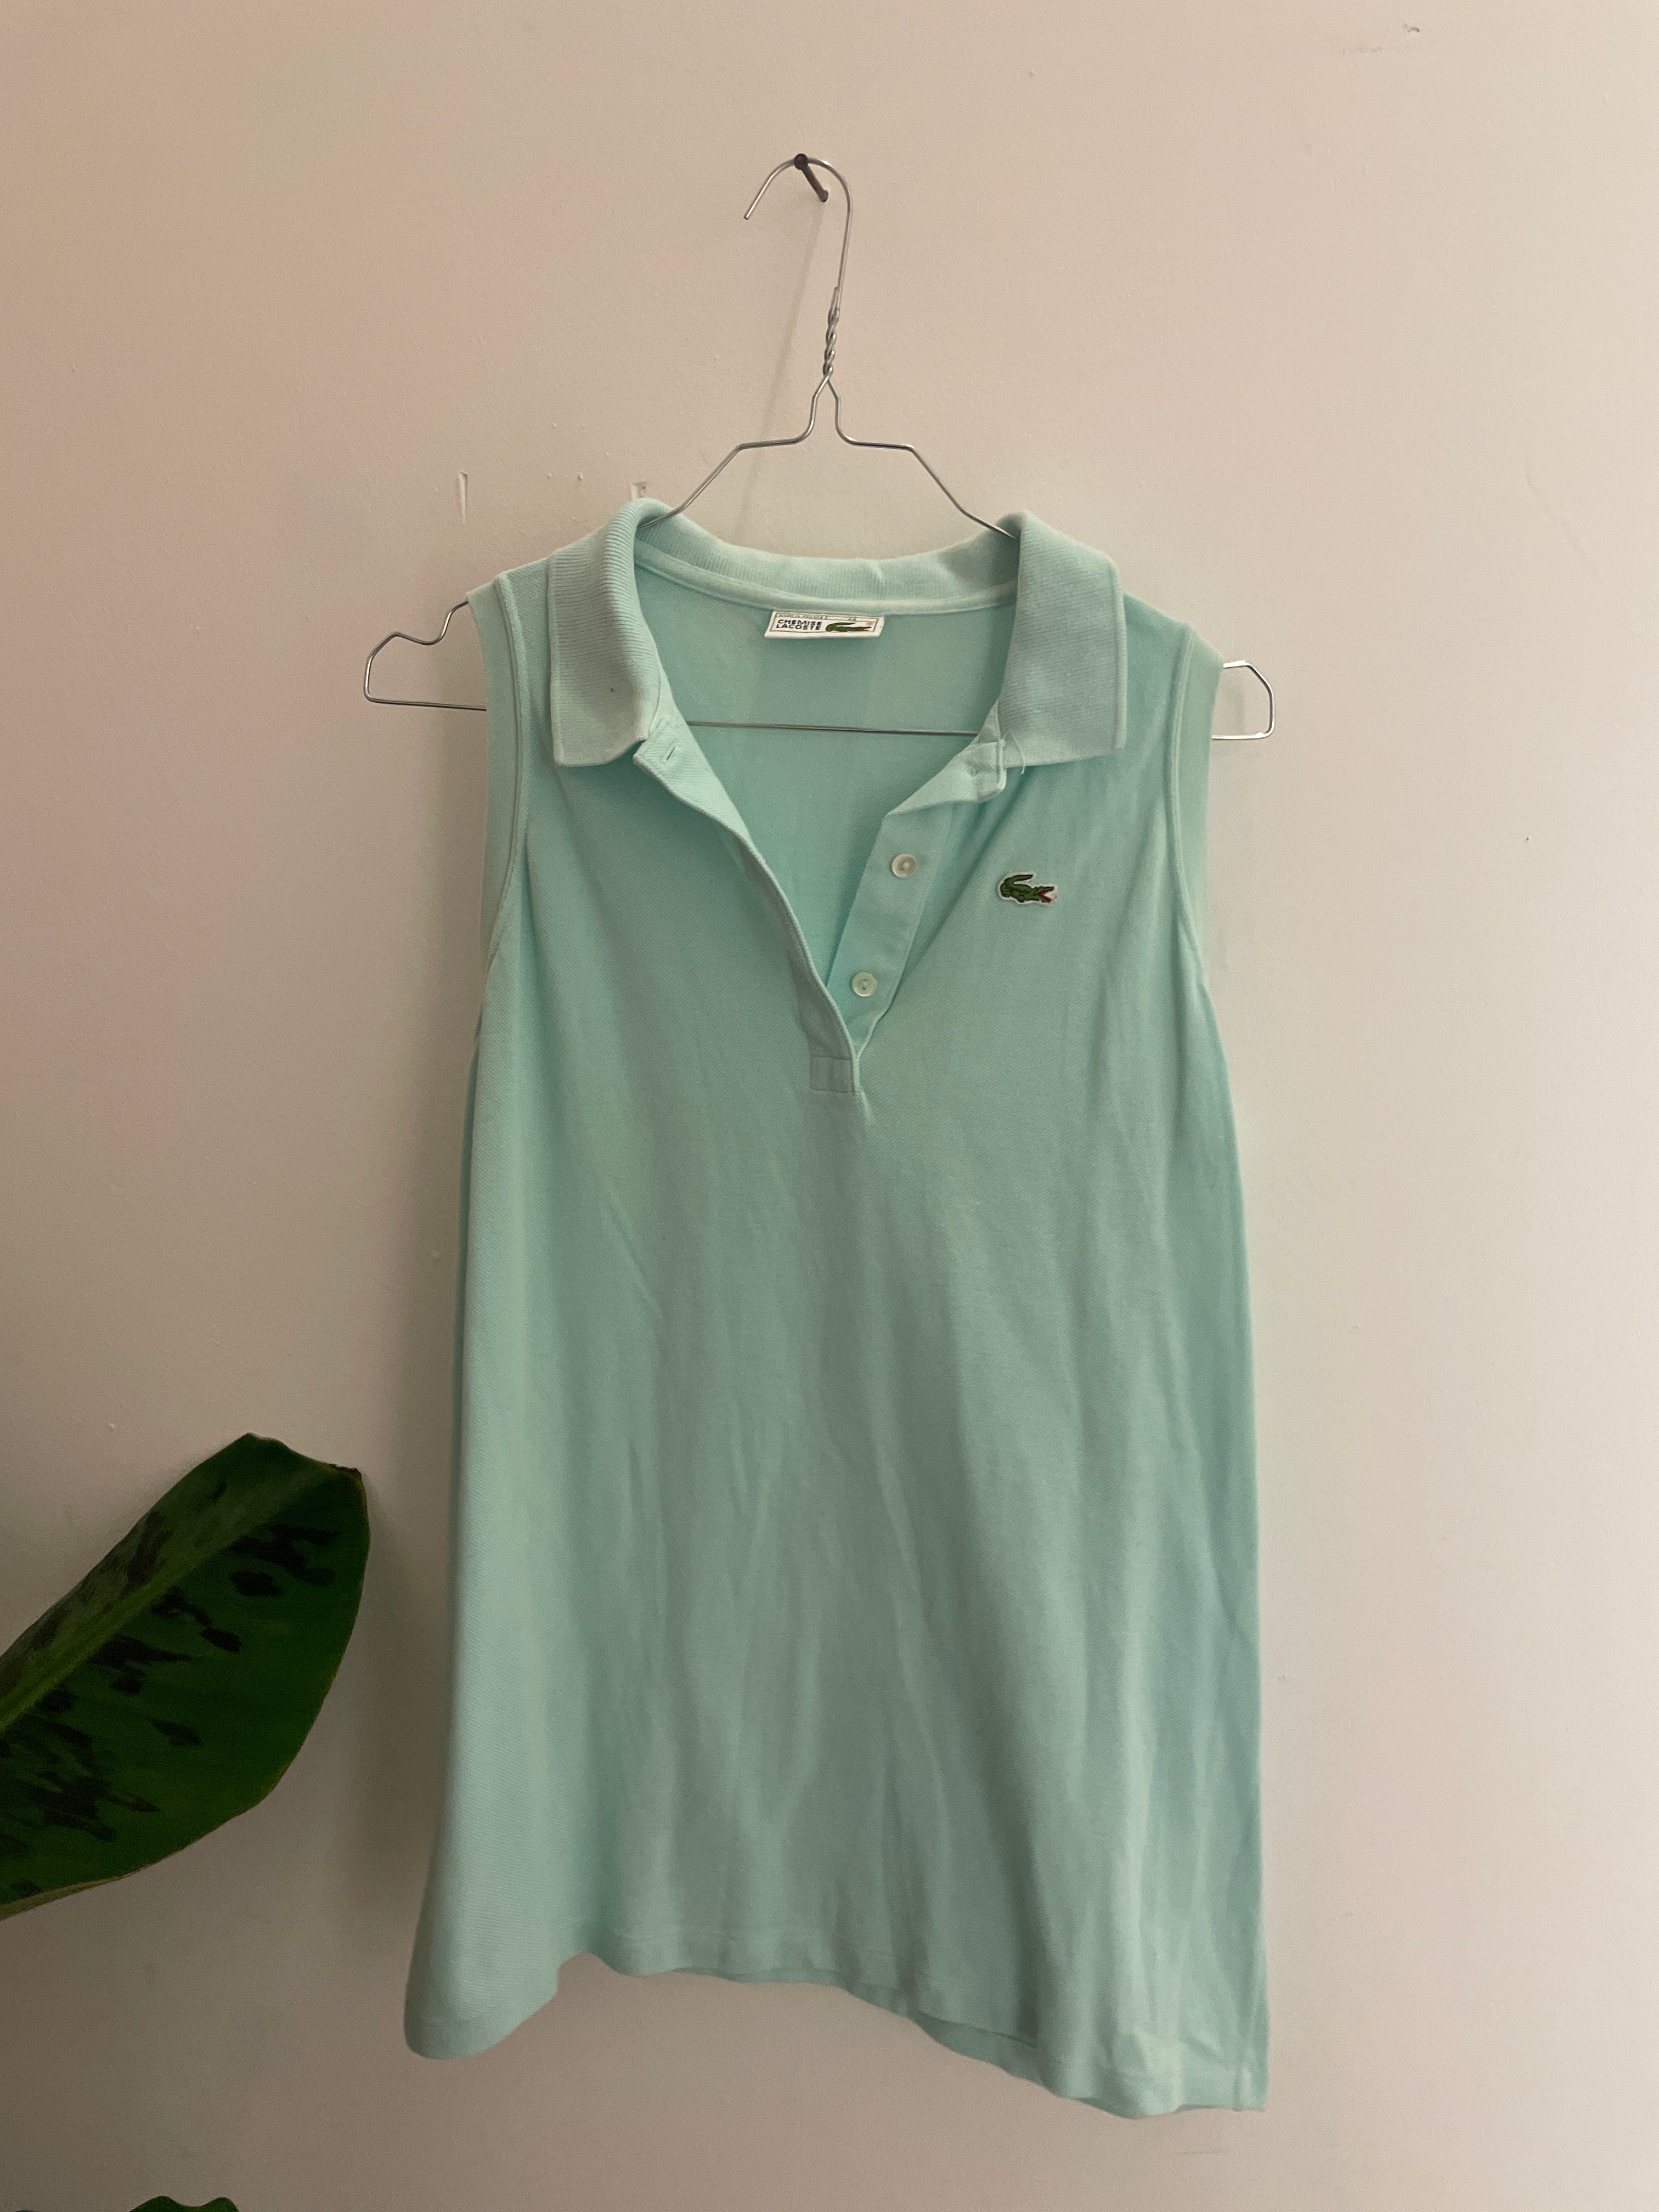 Vintage lacoste chemise turqoise blue polo shirt size L for girls